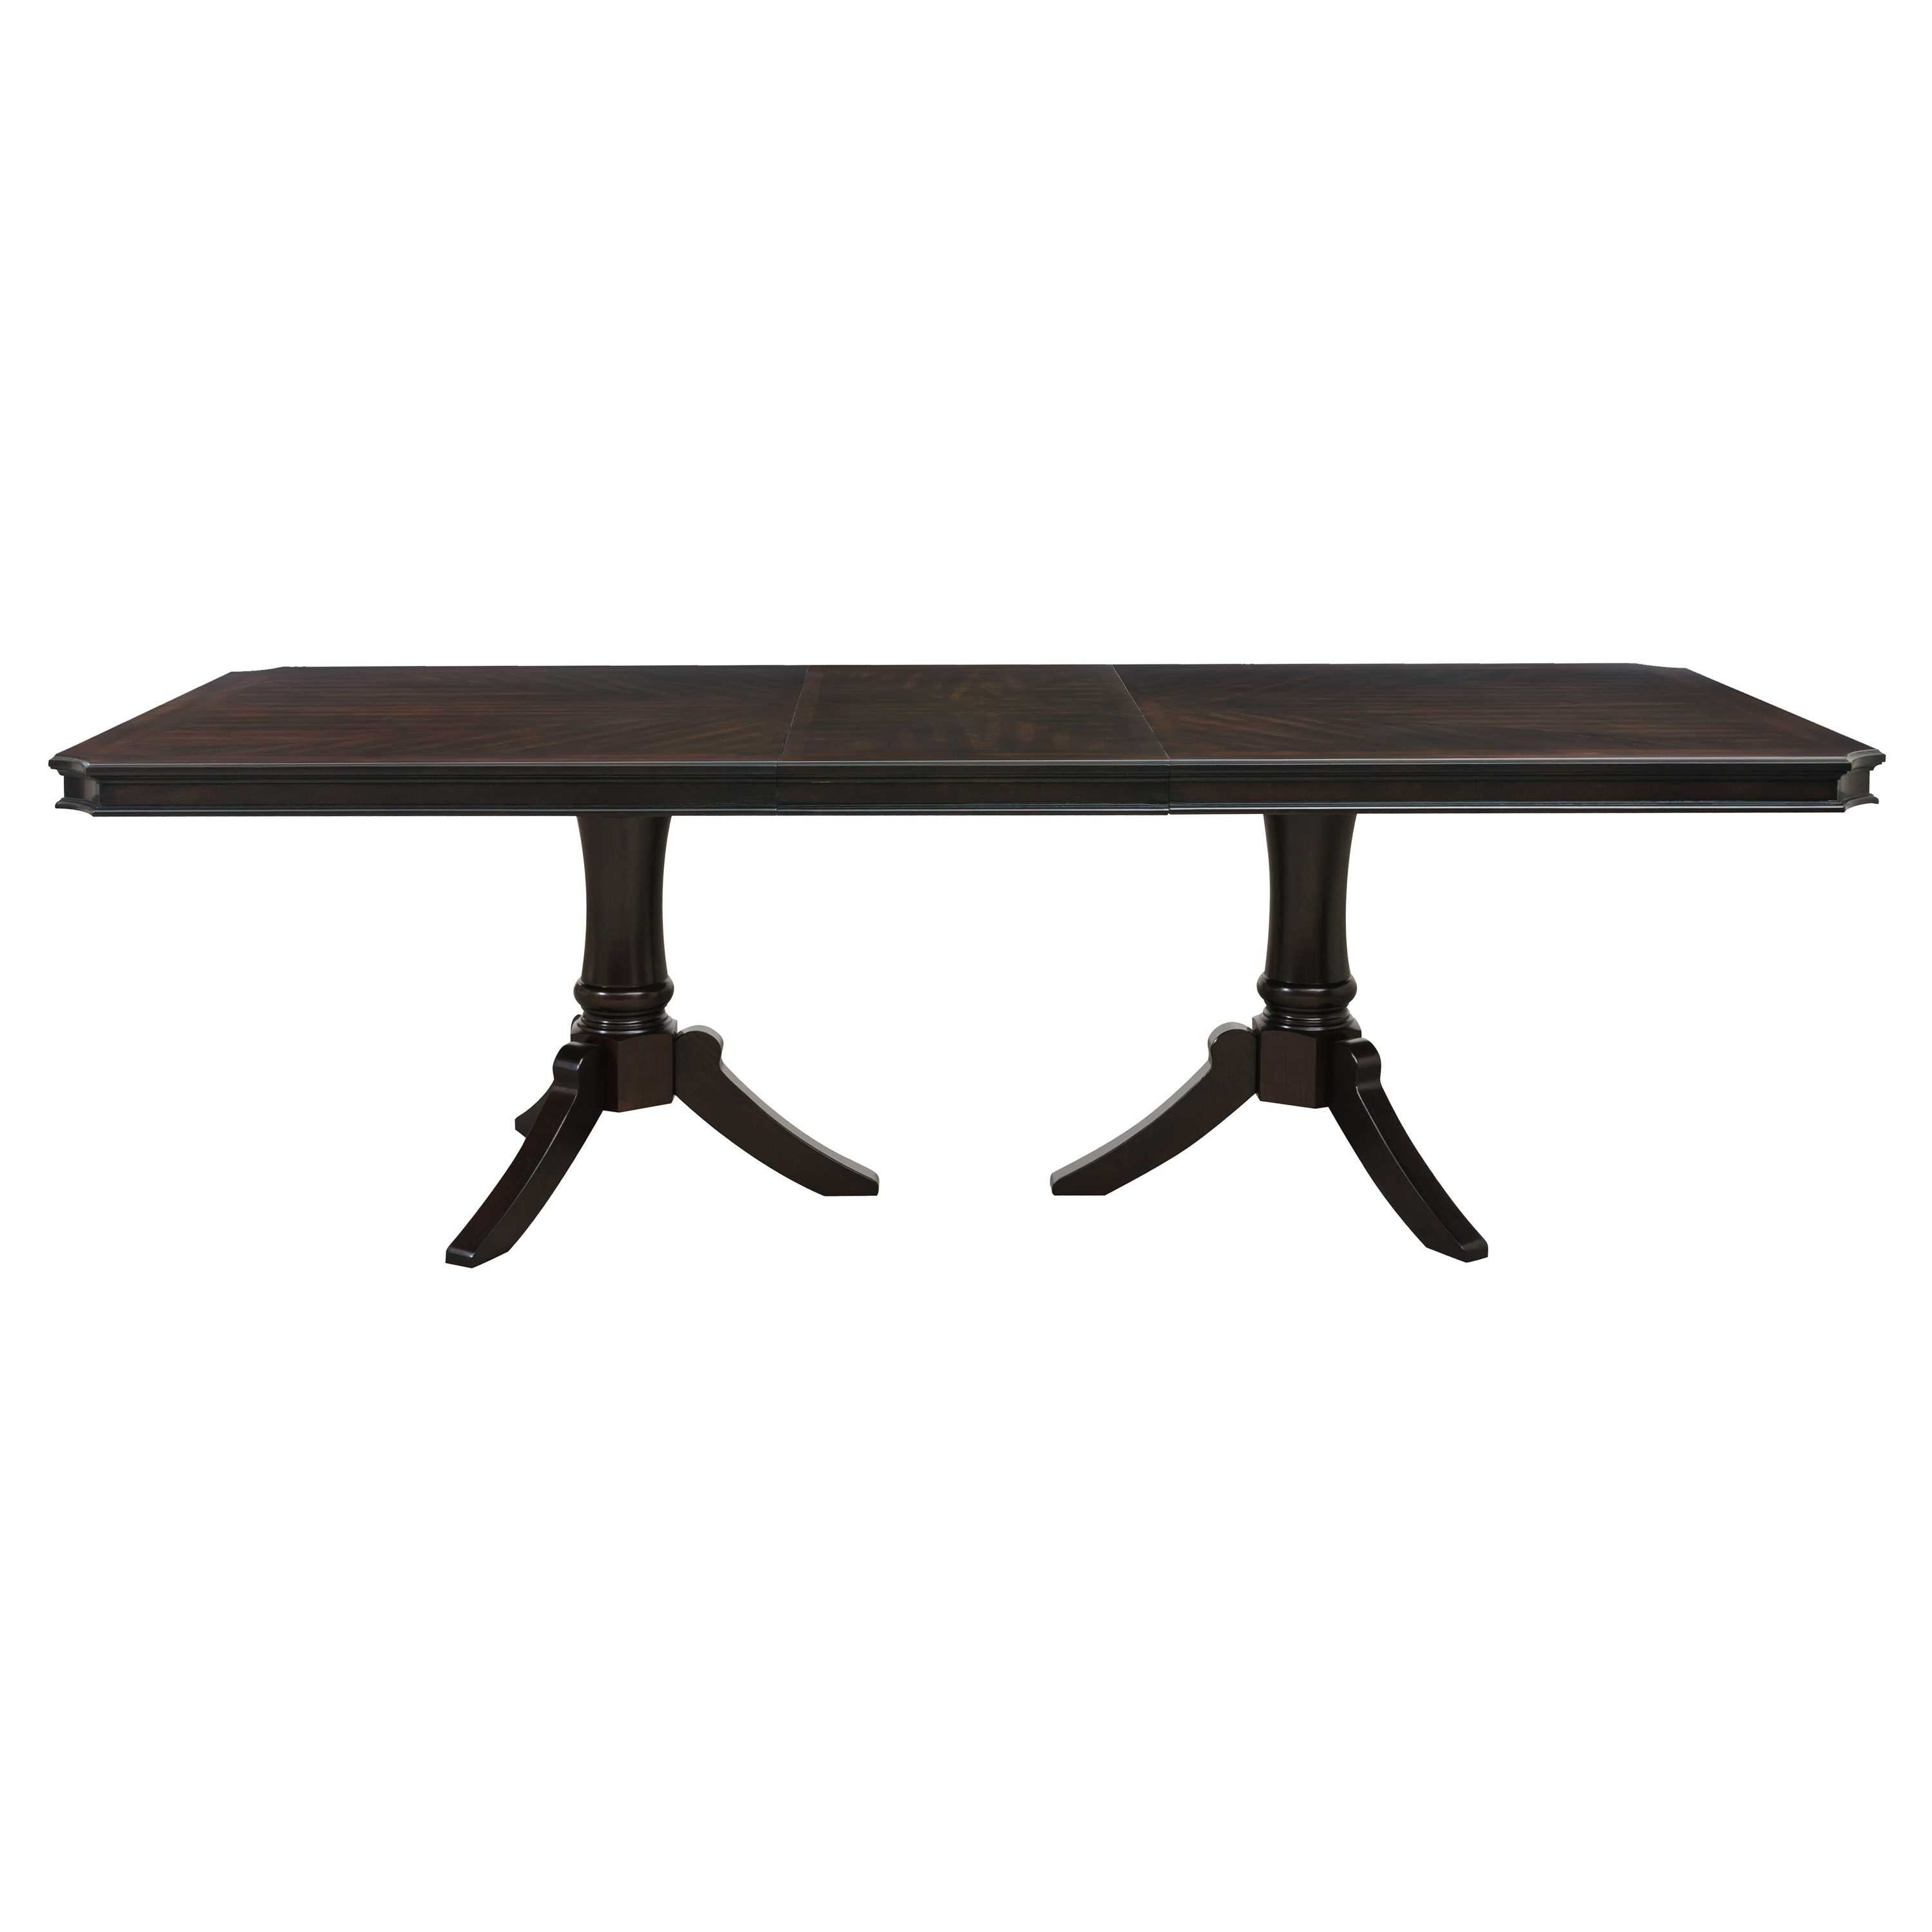 Marston Dining Collection 2615